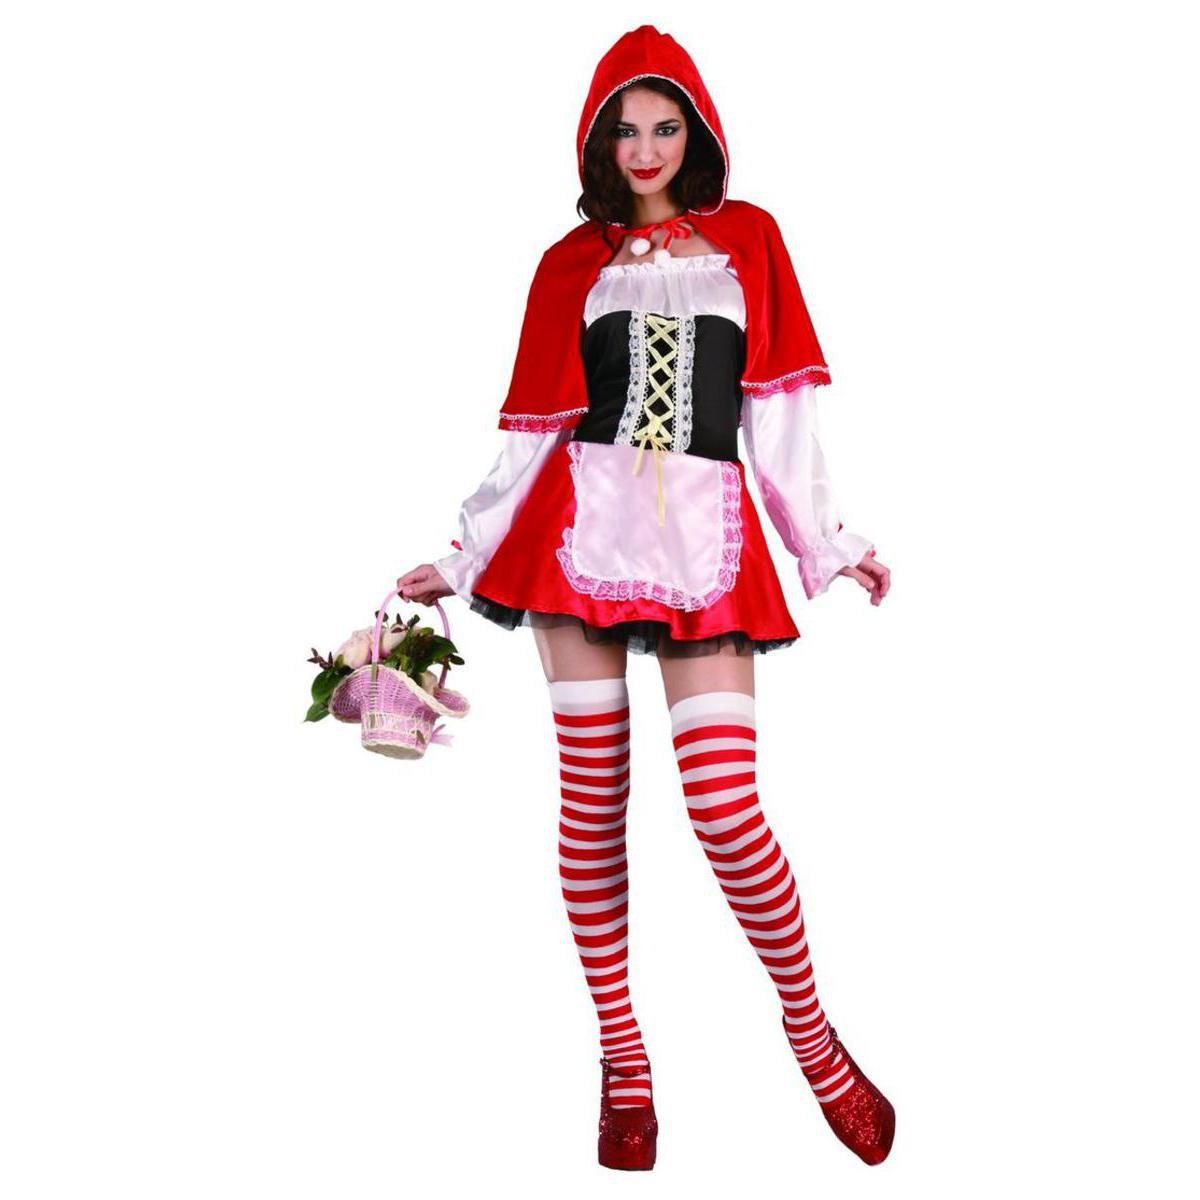 Costume chaperon rouge sexy en polyester - S/M -Multicolore